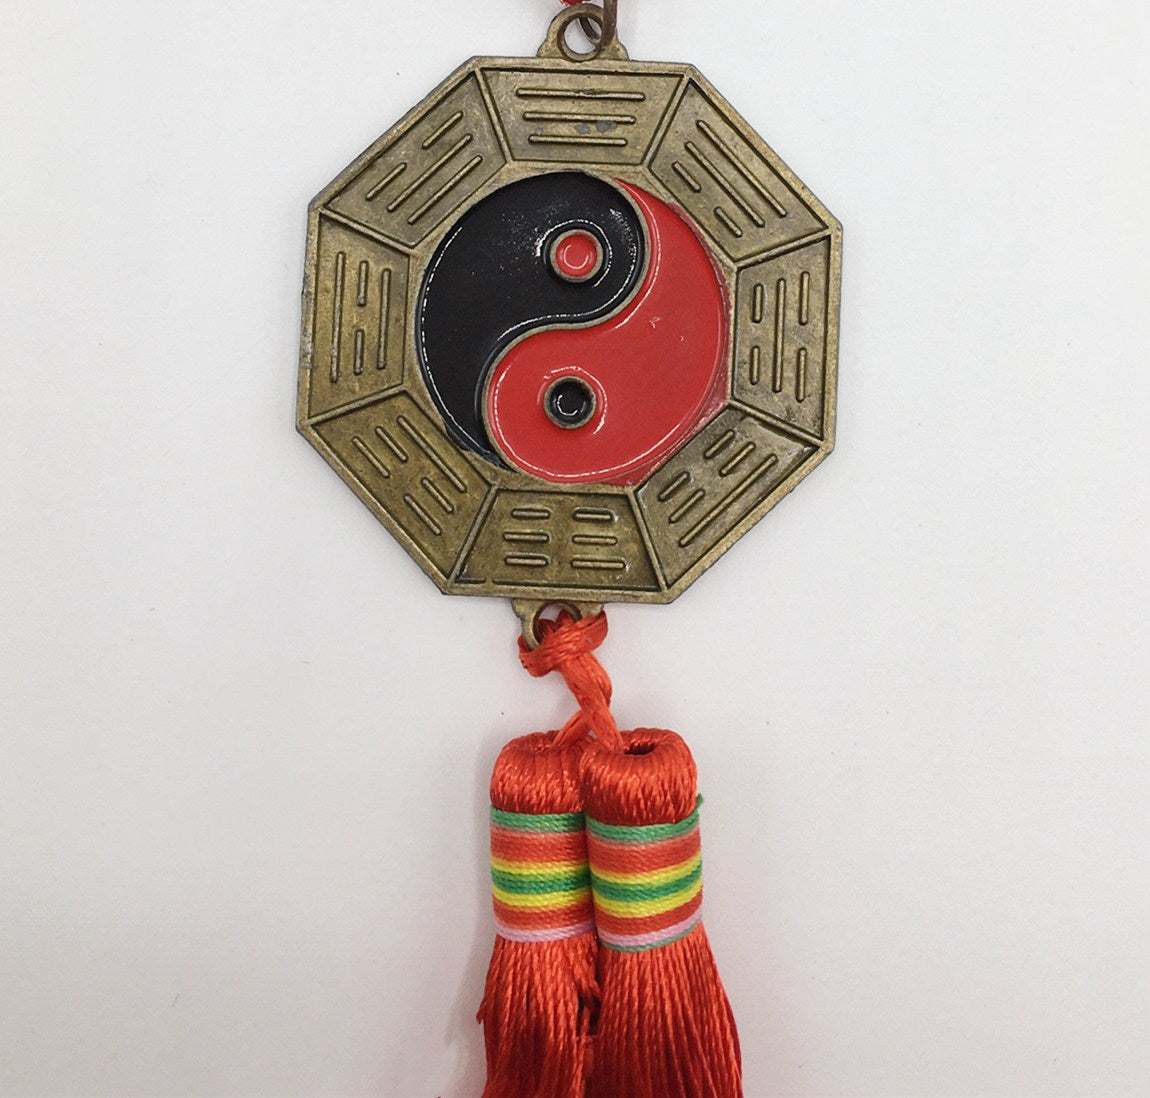 YinYang Feng Shui ornament with Chinese red thread knot